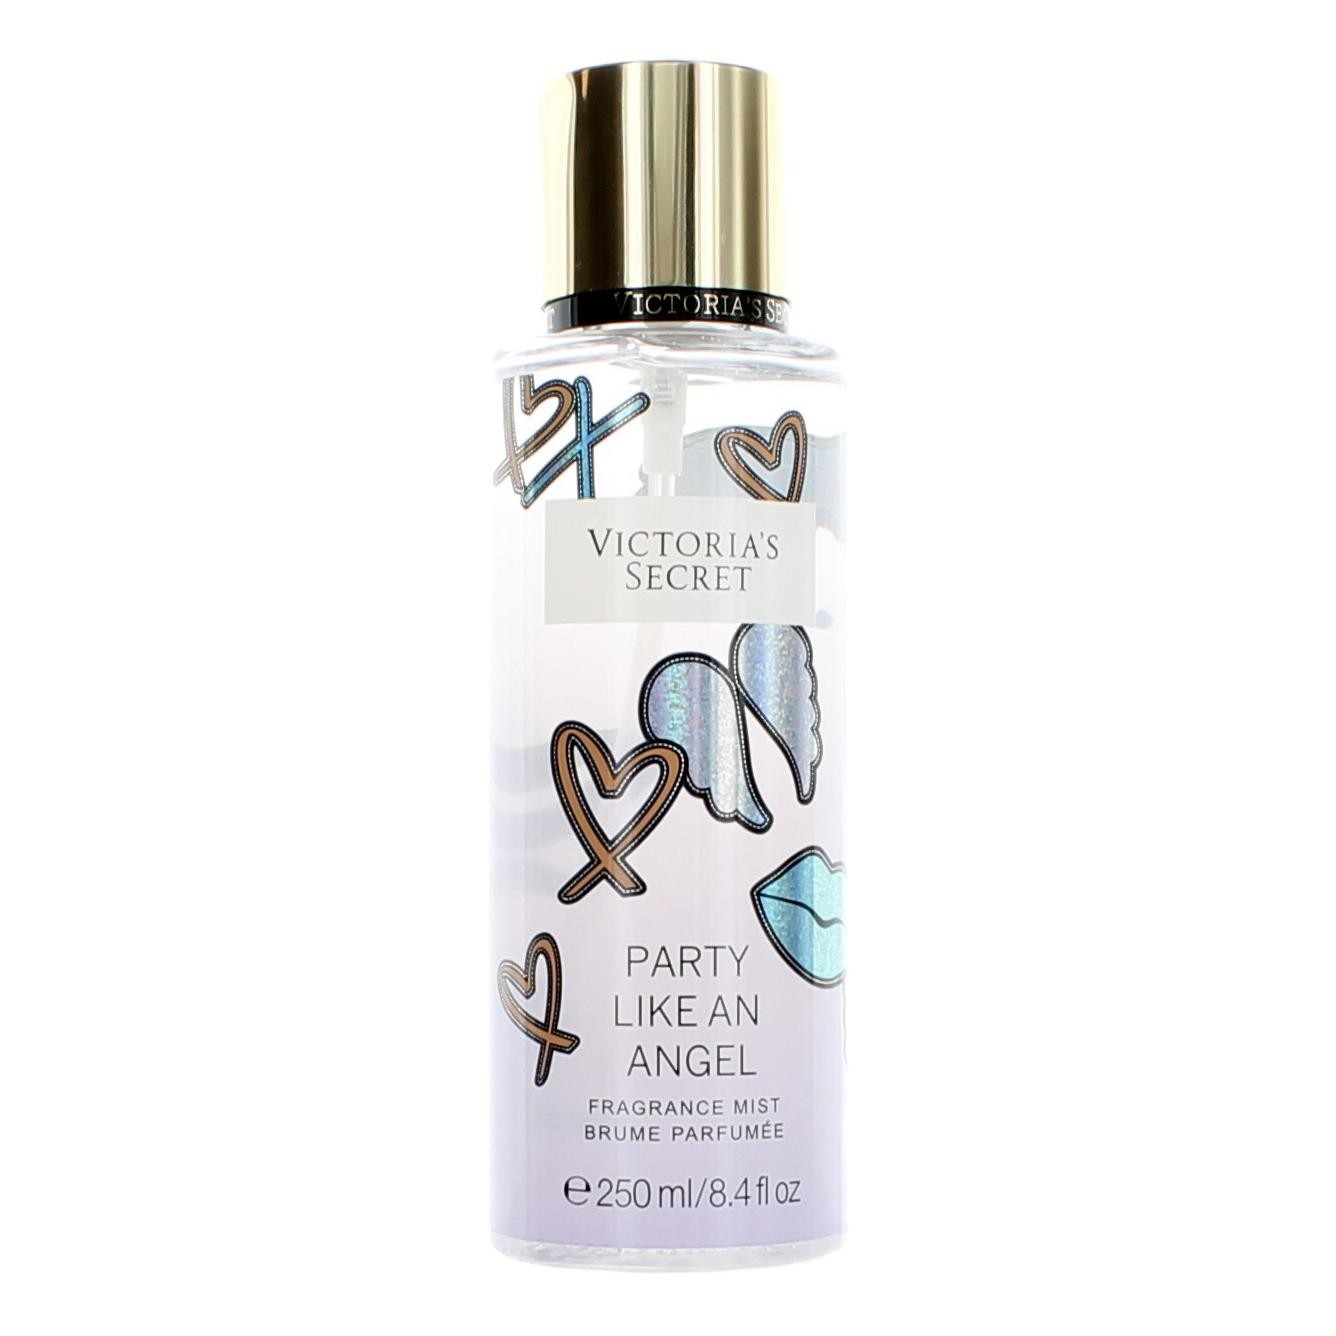 Party Like An Angel by Victoria's Secret 8.4 oz Fragrance Mist for Women